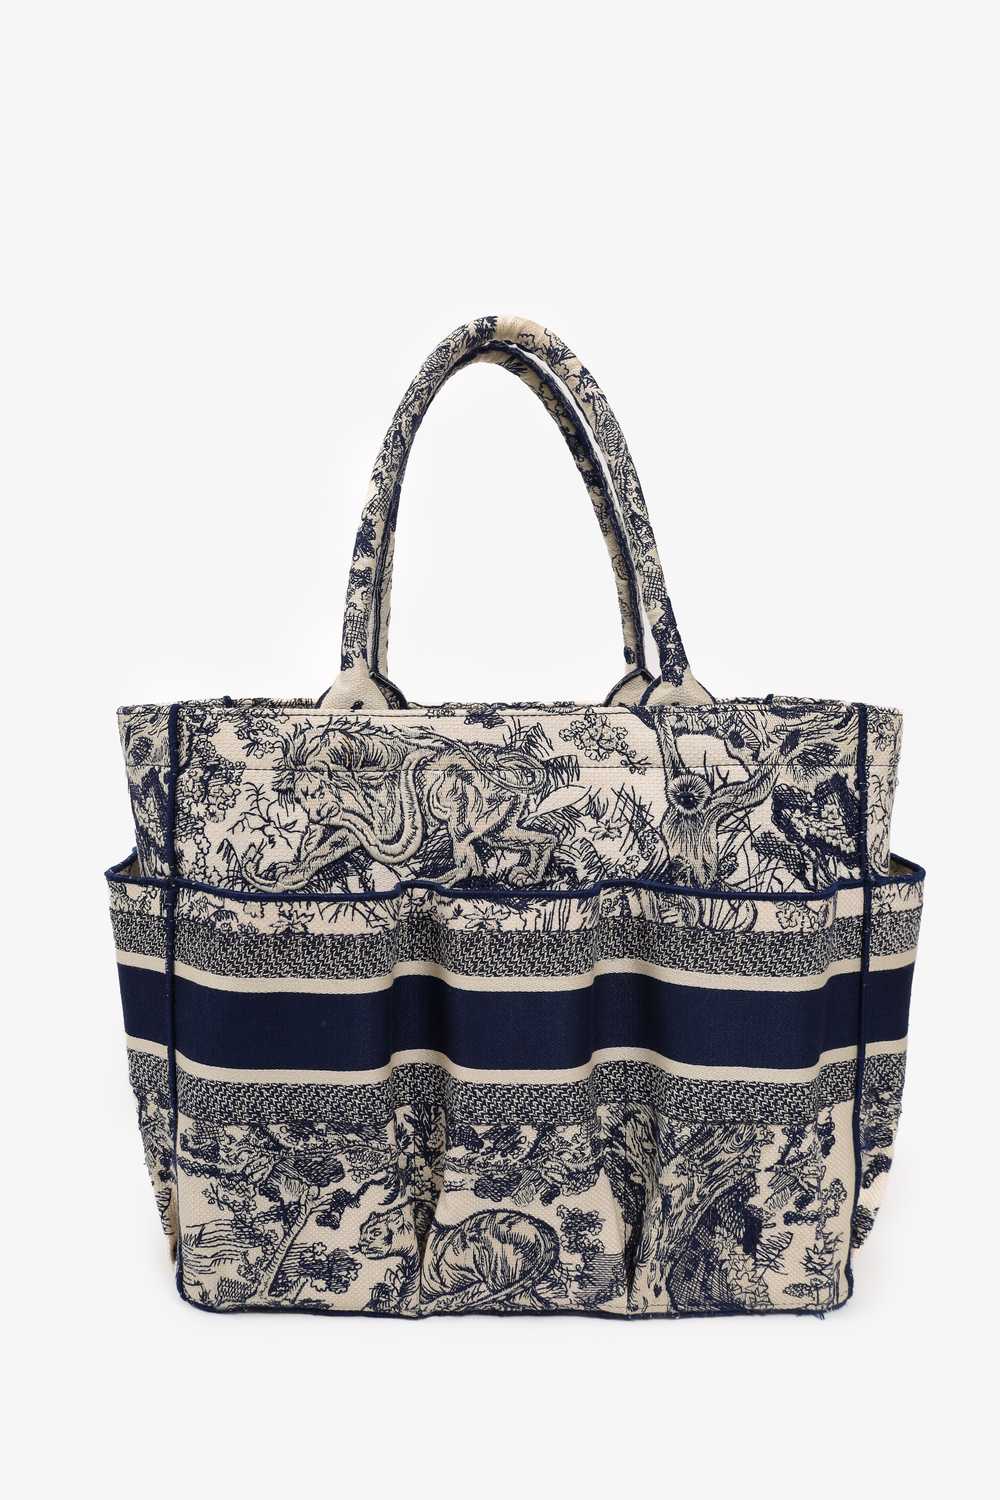 Christian Dior 2020 Navy/White Canvas Embroidered… - image 6